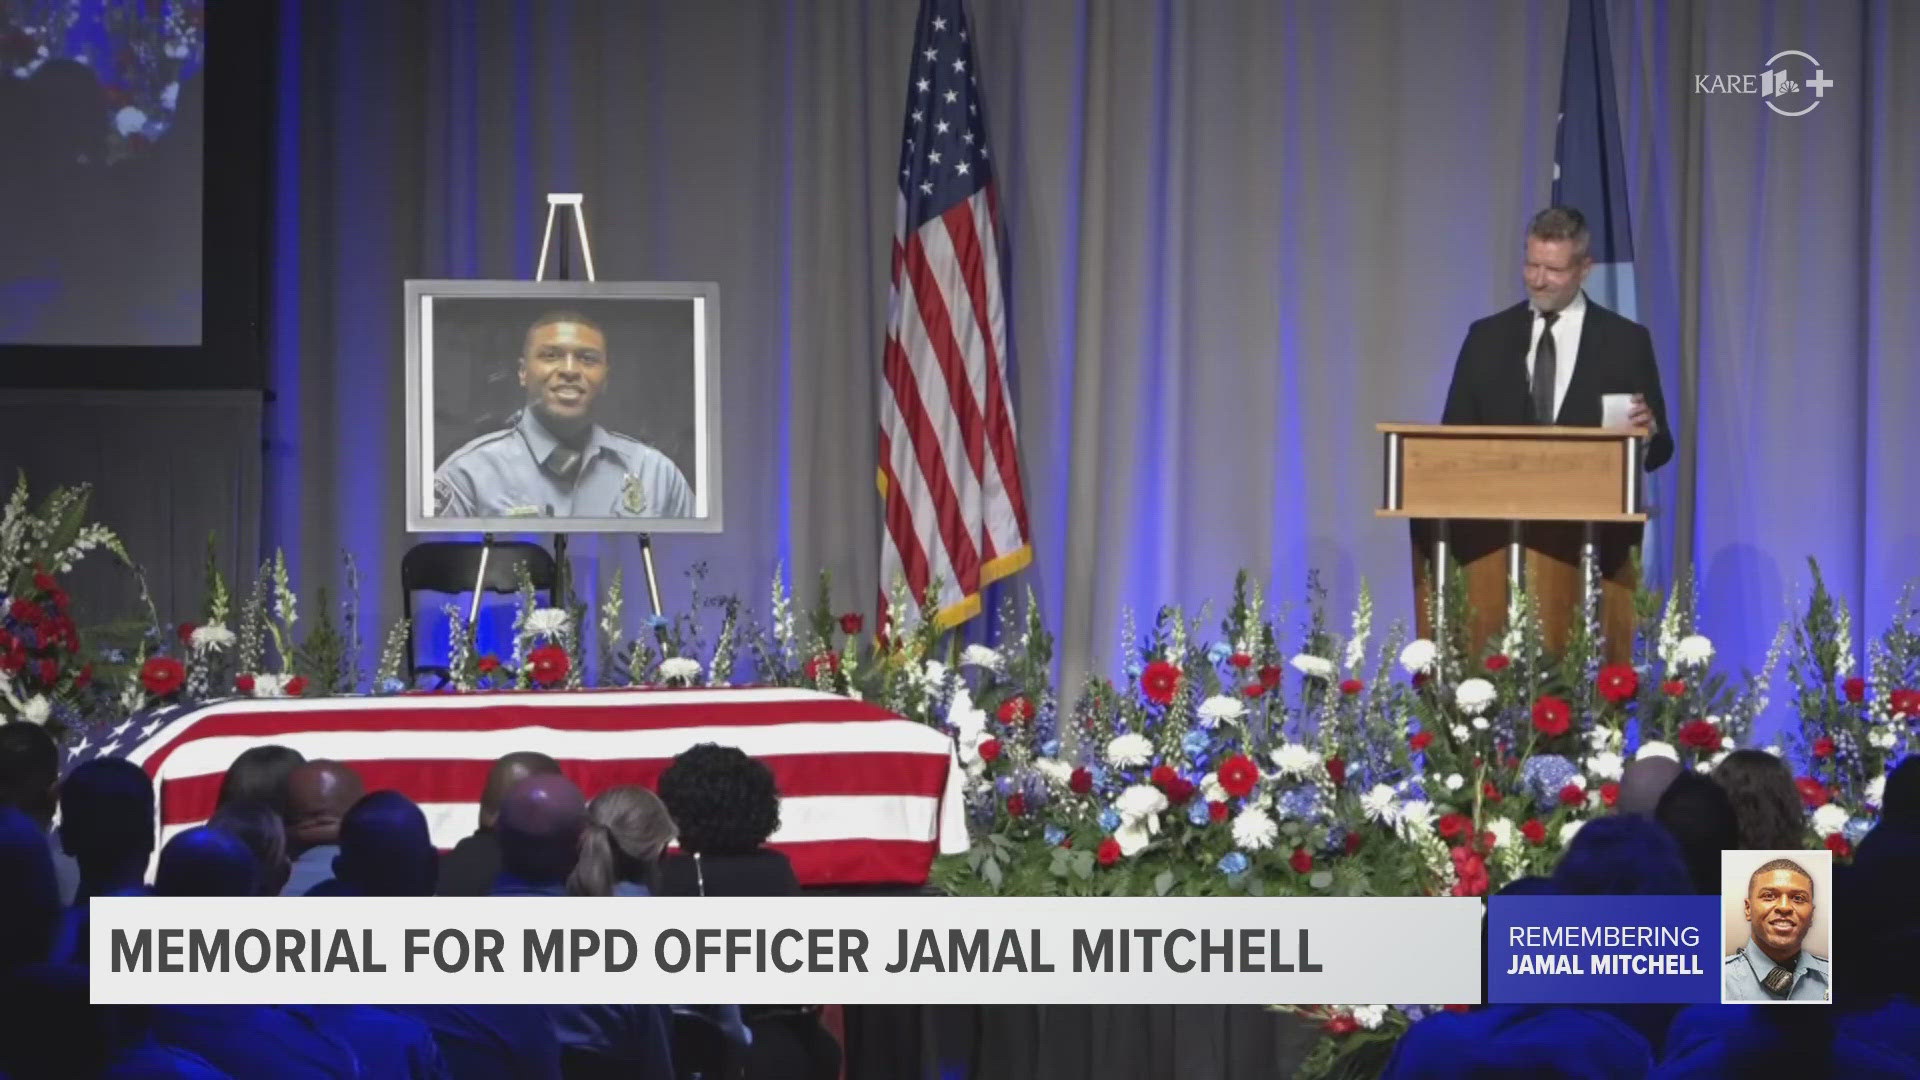 At the memorial service for MPD officer Jamal Mitchell, Eagle Brook Pastor Mike Emmert thanked God for the life of Officer Mitchell.